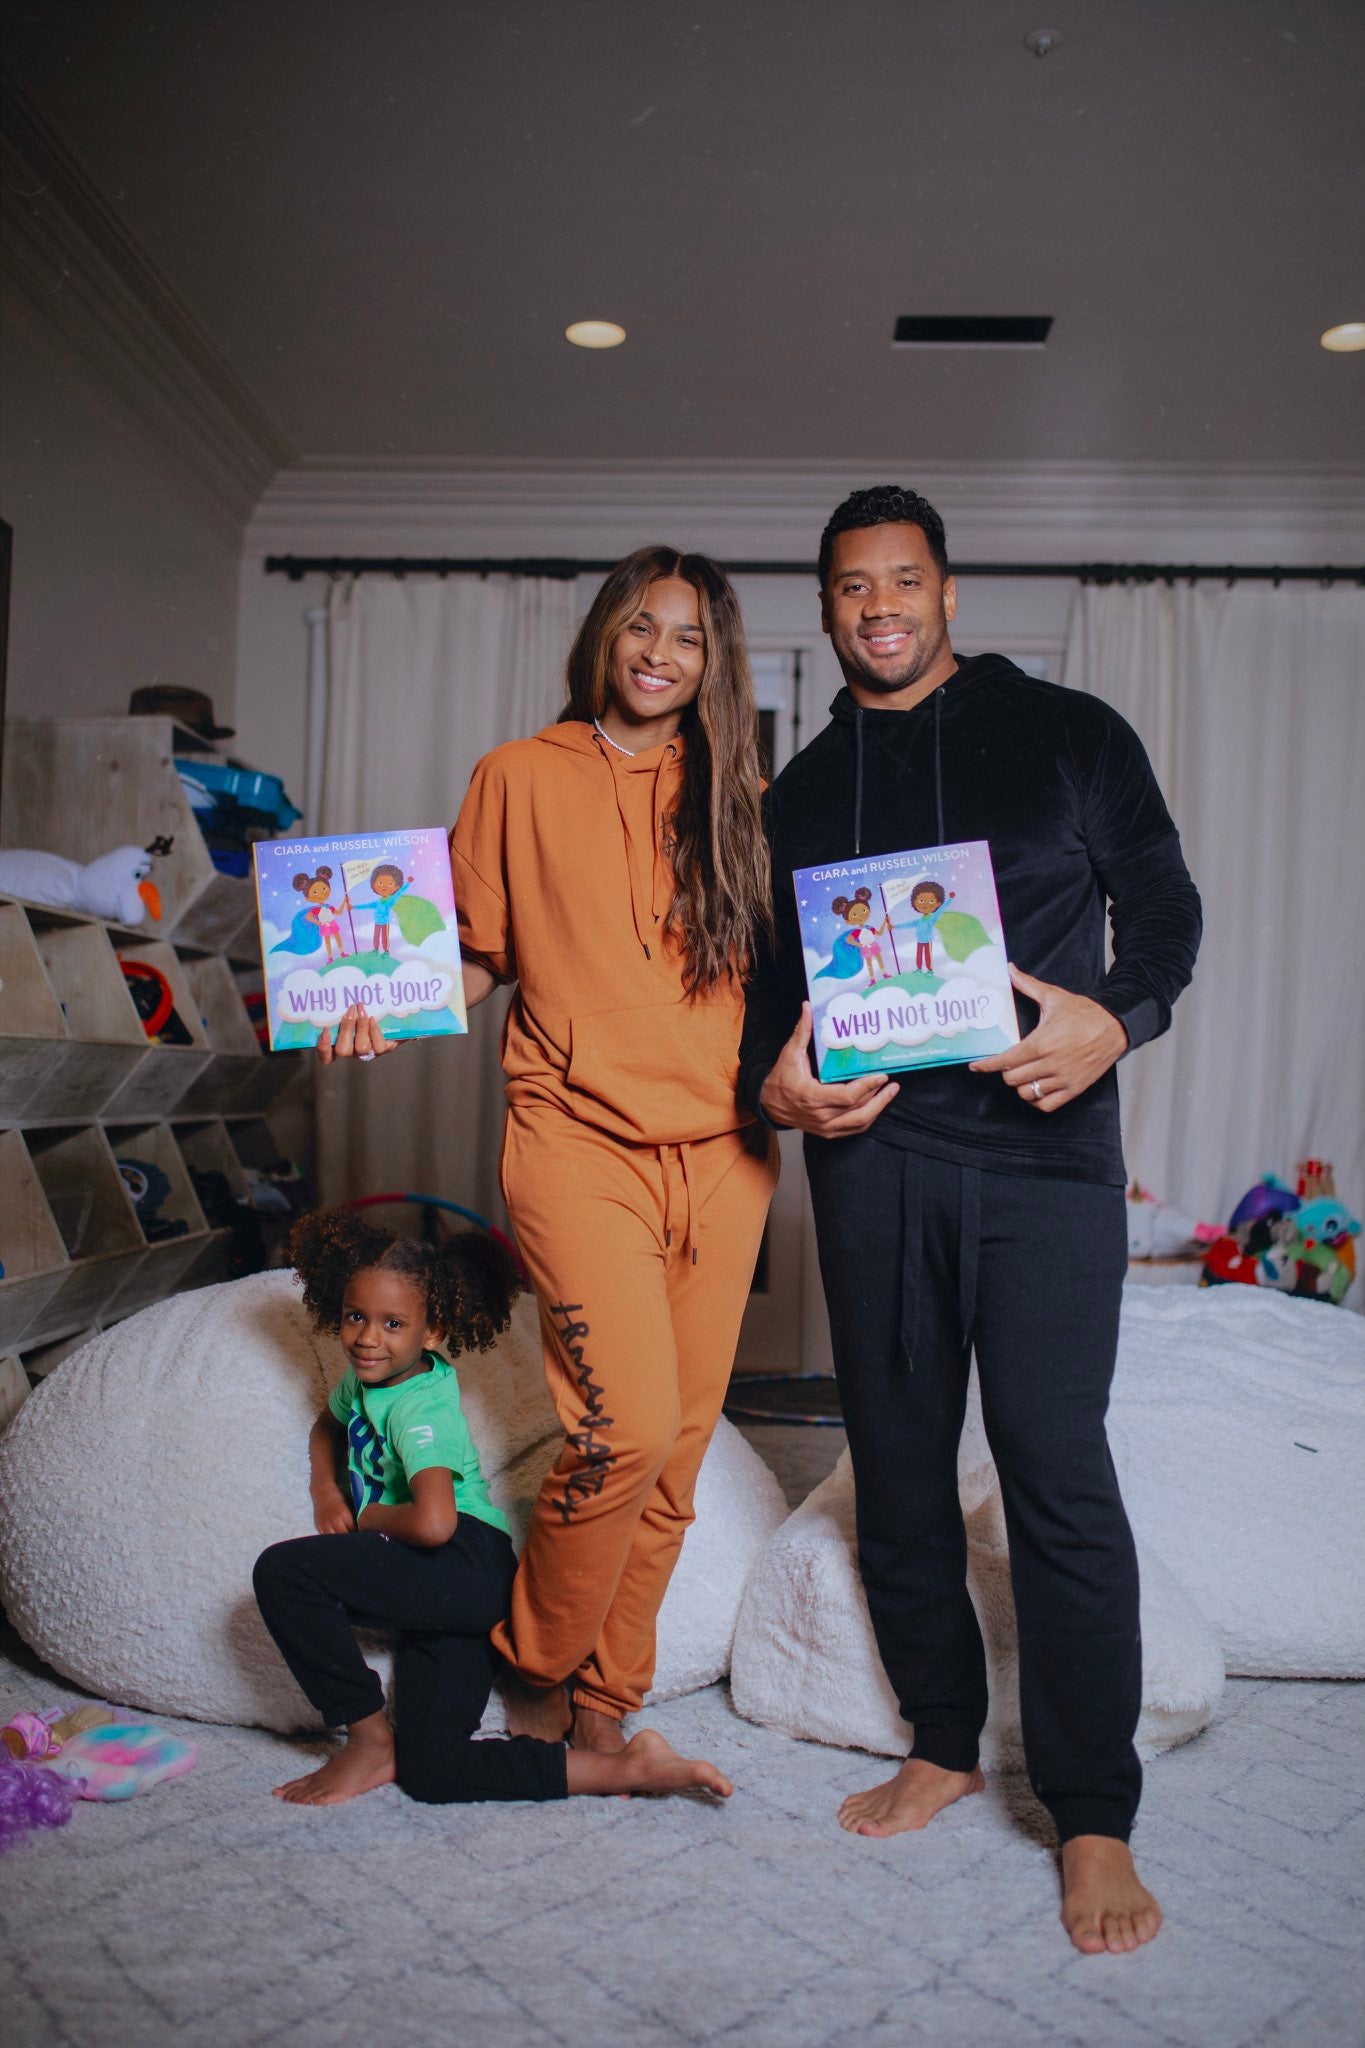 Russell Wilson Talks New Children’s Book And How A ‘Why Not You?’ Attitude Helped Him Land Ciara